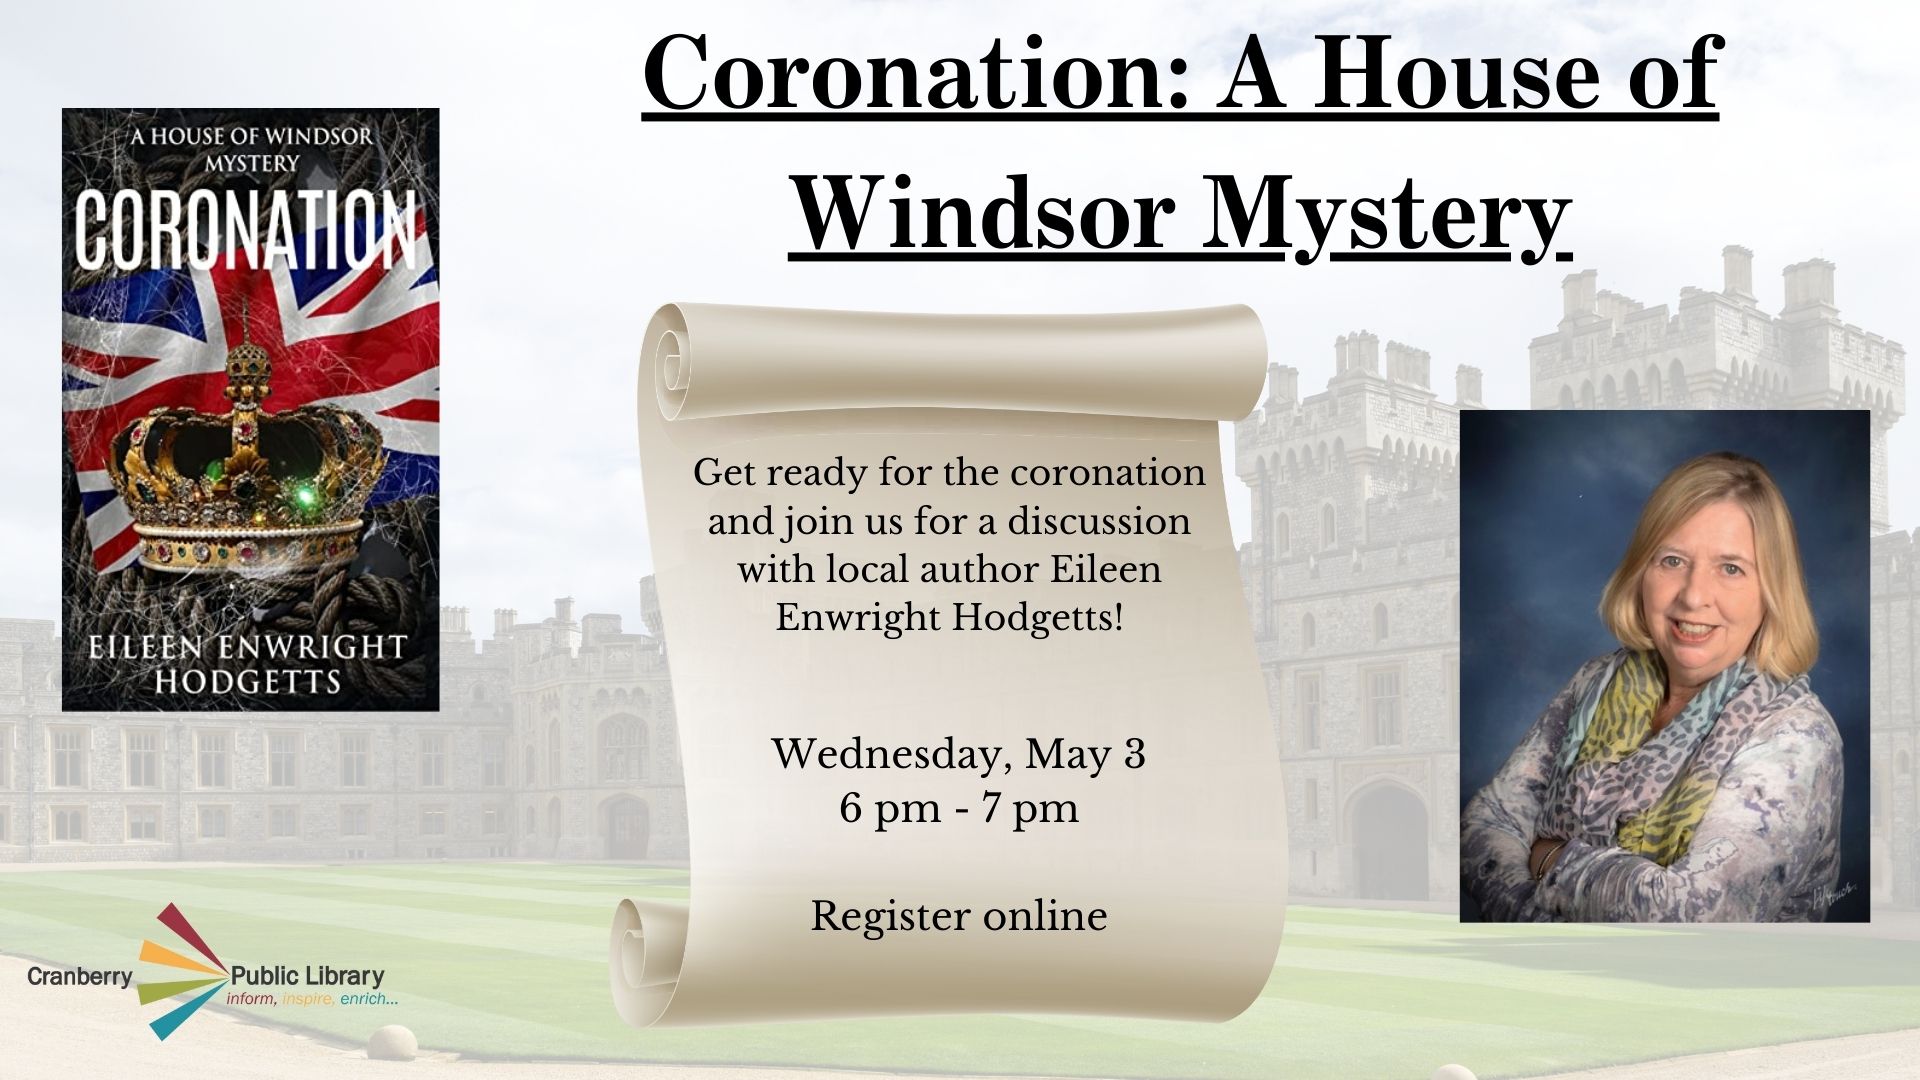 Flyer for Coronation: A House of Windsor Mystery presentation